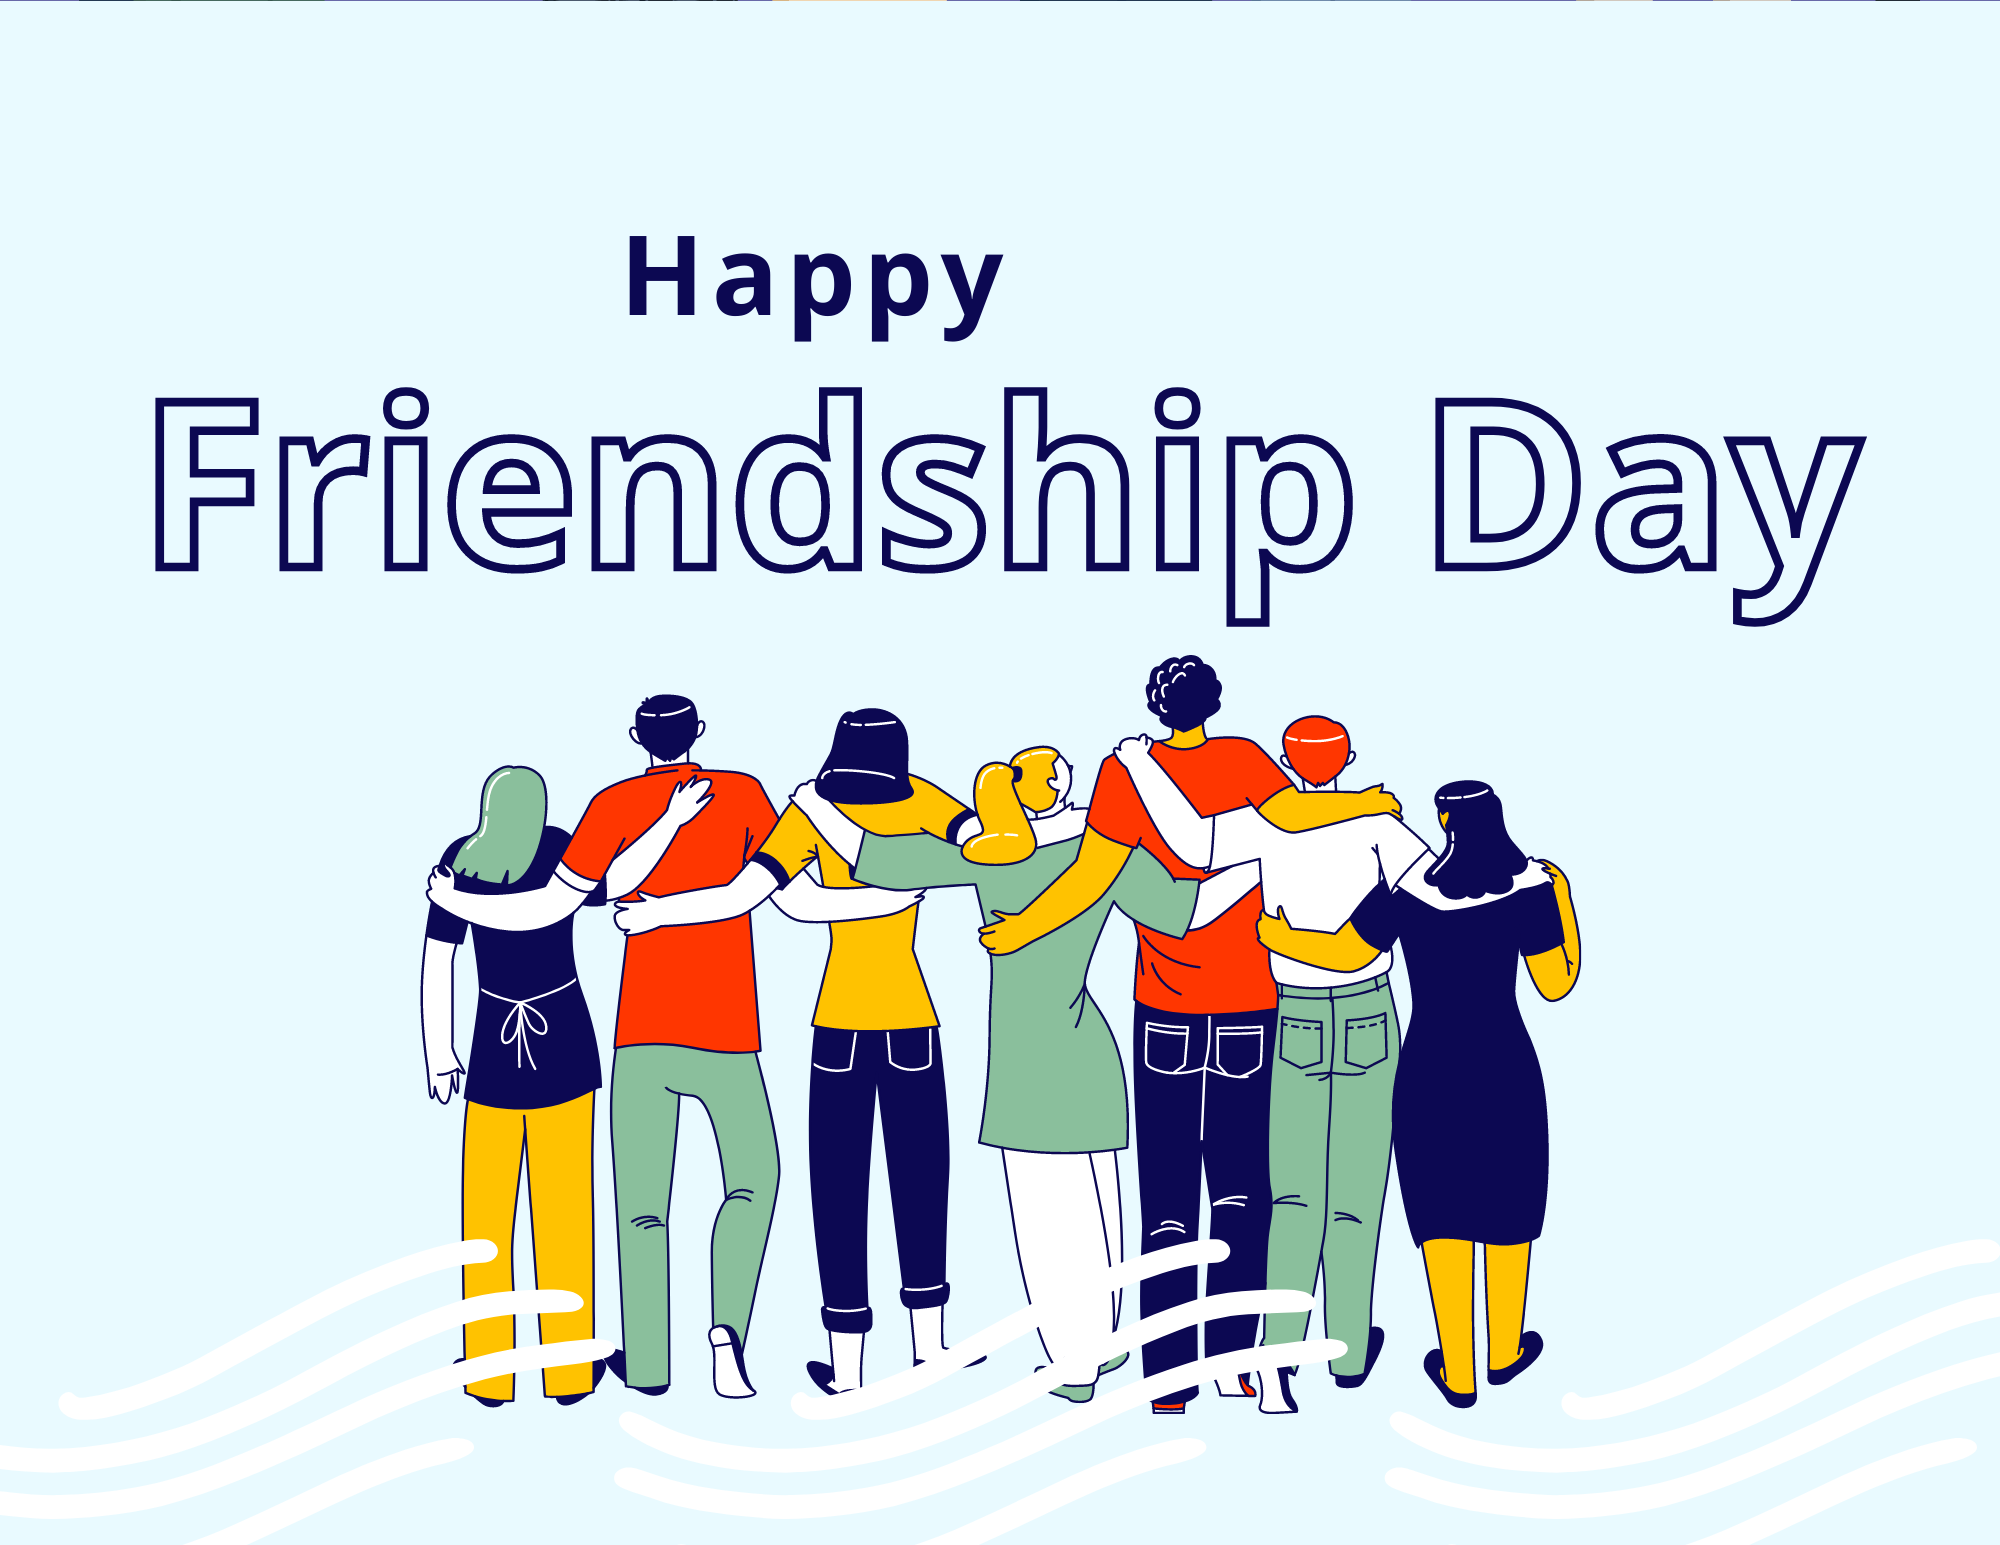 An image of a globe with interlinked hands, representing International Happy Friendship Day 2023, a day dedicated to celebrating friendships across nations and cultures